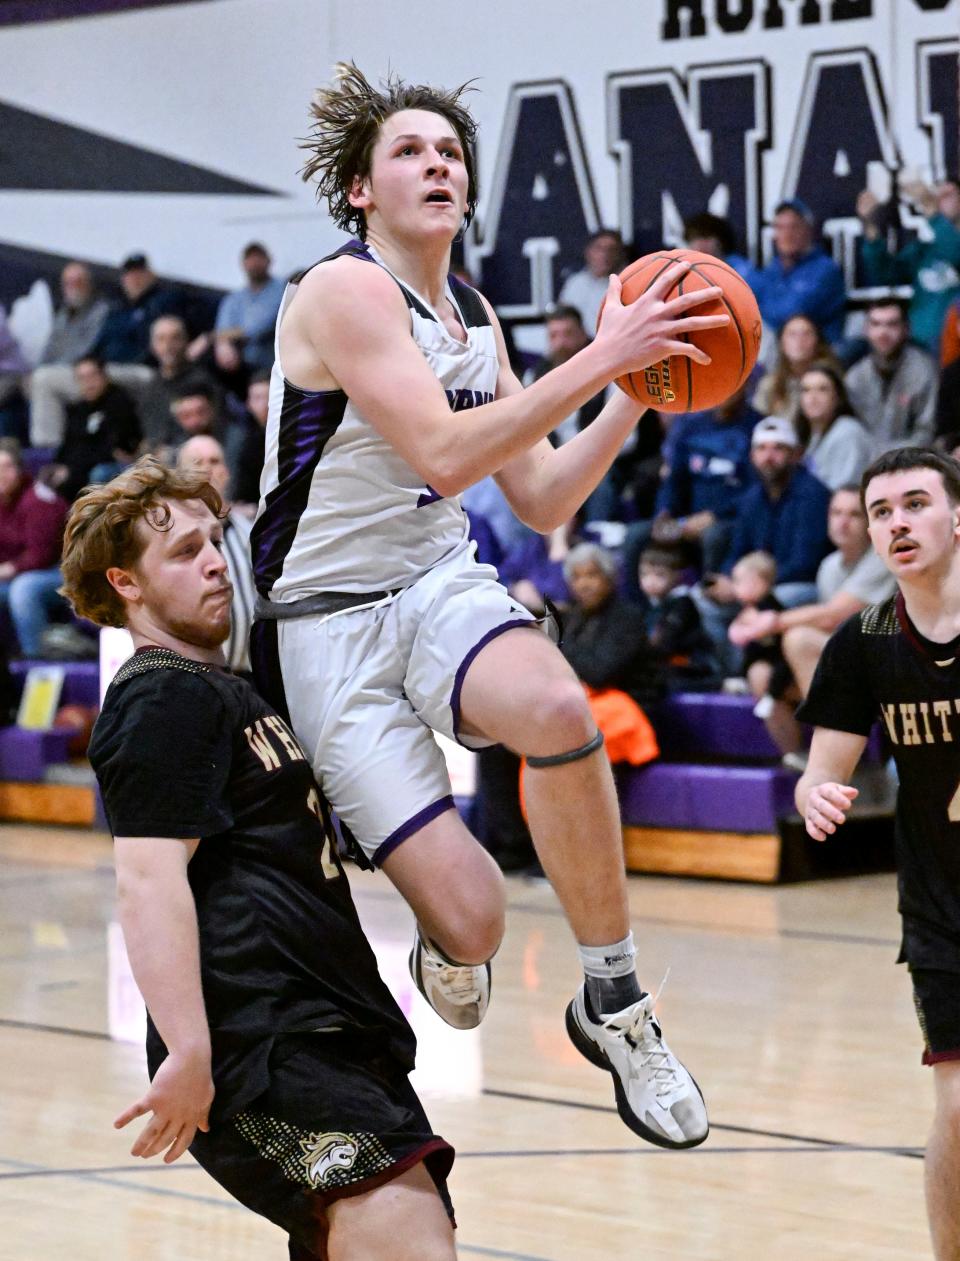 Shea Ullo of Bourne shoots glides to the hoop past Anthony Moro of Whittier RVT in Div. 4 Round of 32 basketball tournament
(Photo: Ron Schloerb/Cape Cod Times)